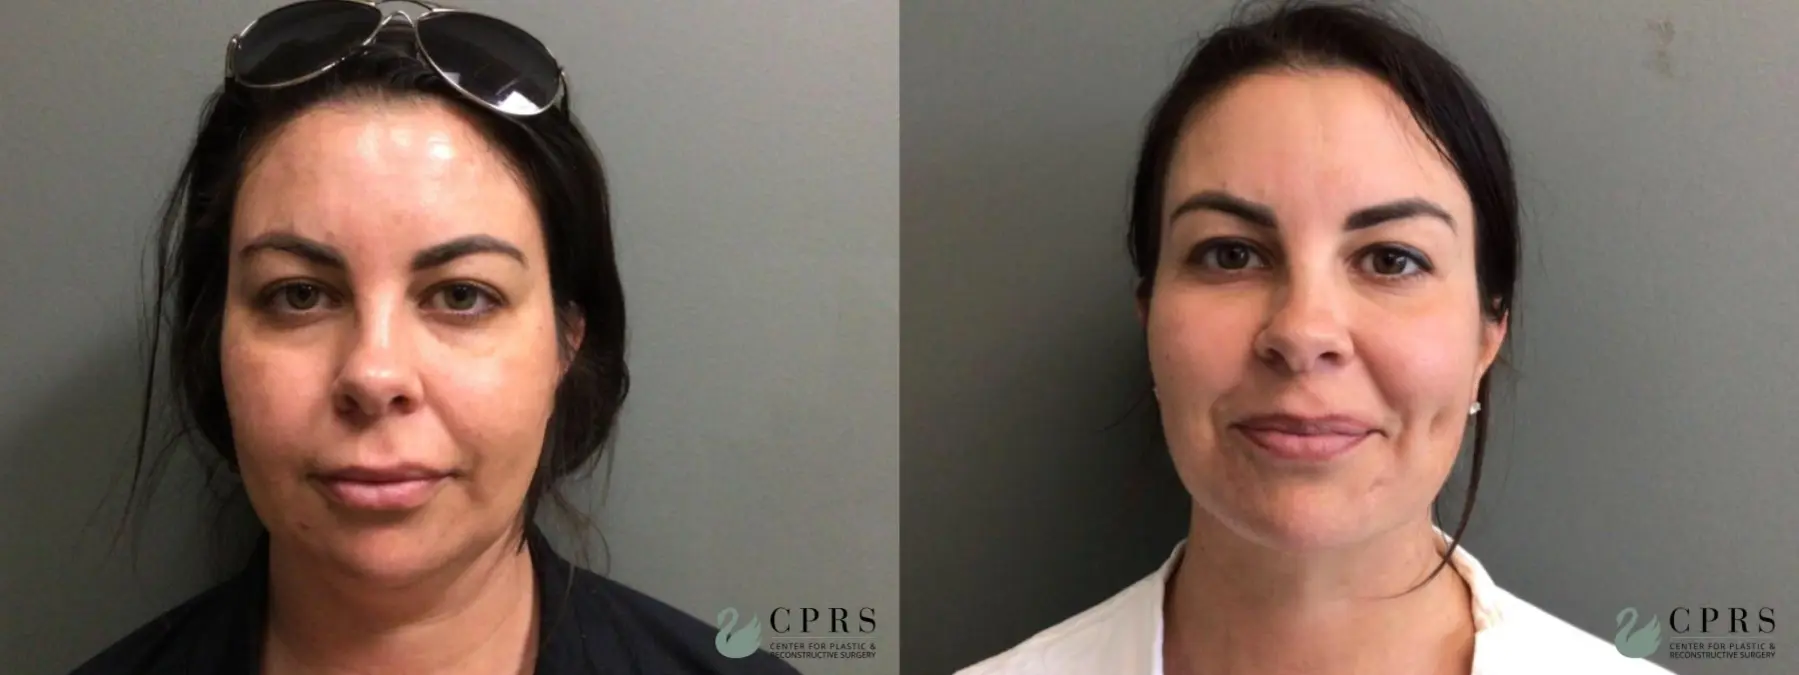 Neck Lift: Patient 2 - Before and After  